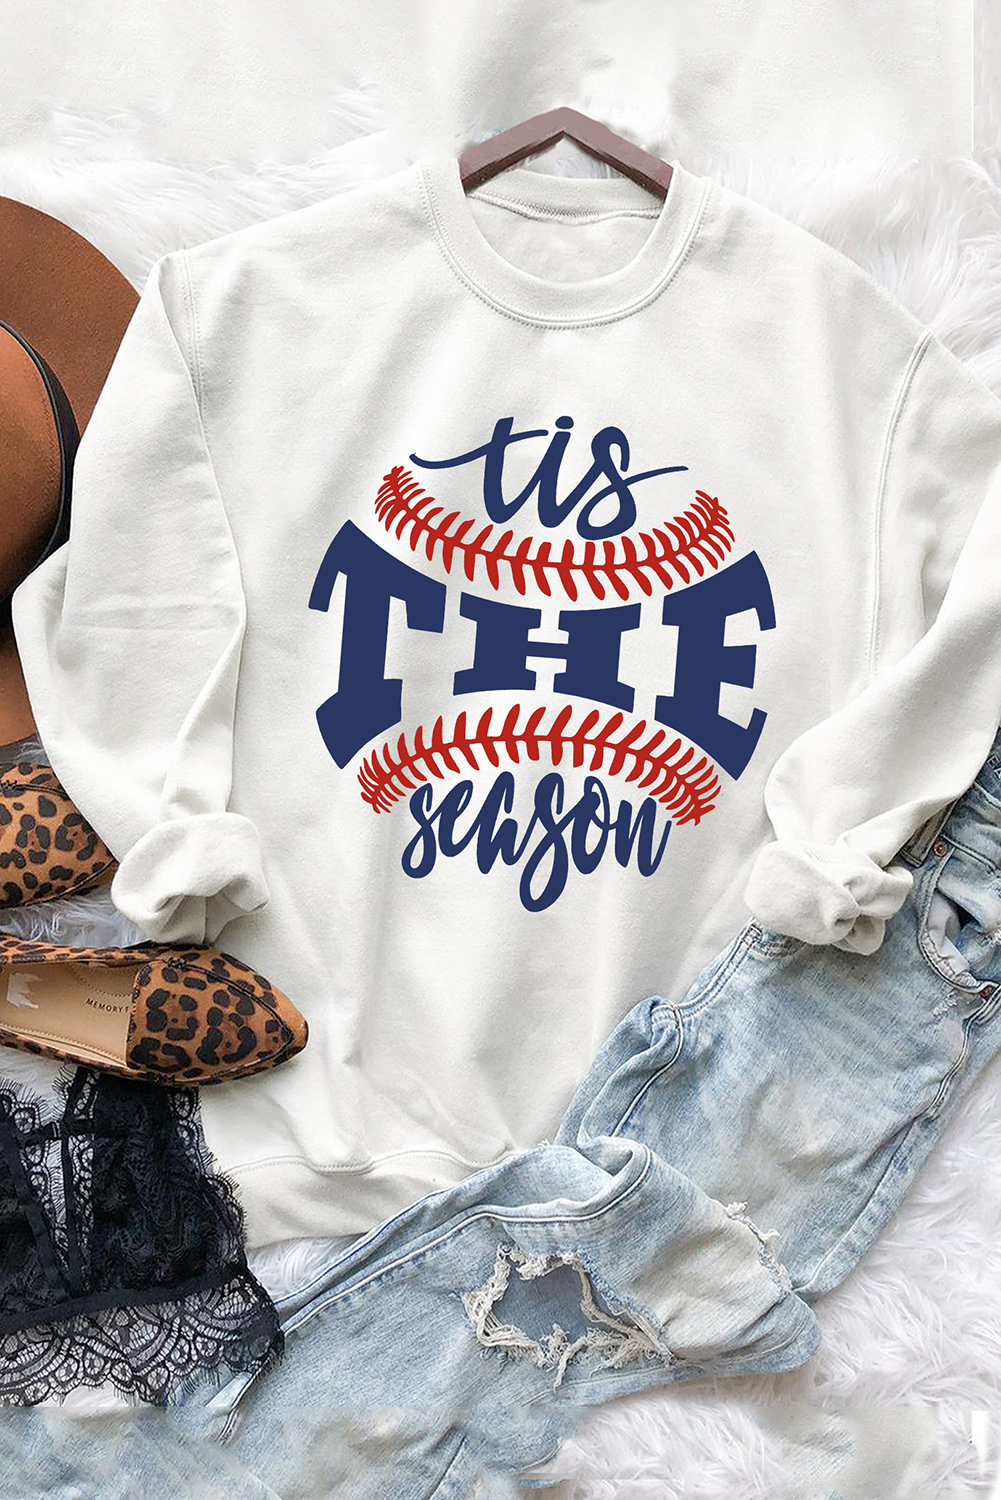 Shewin Wholesale Southern White Casual Letter Print BASEBALL Graphic Sweatshirt